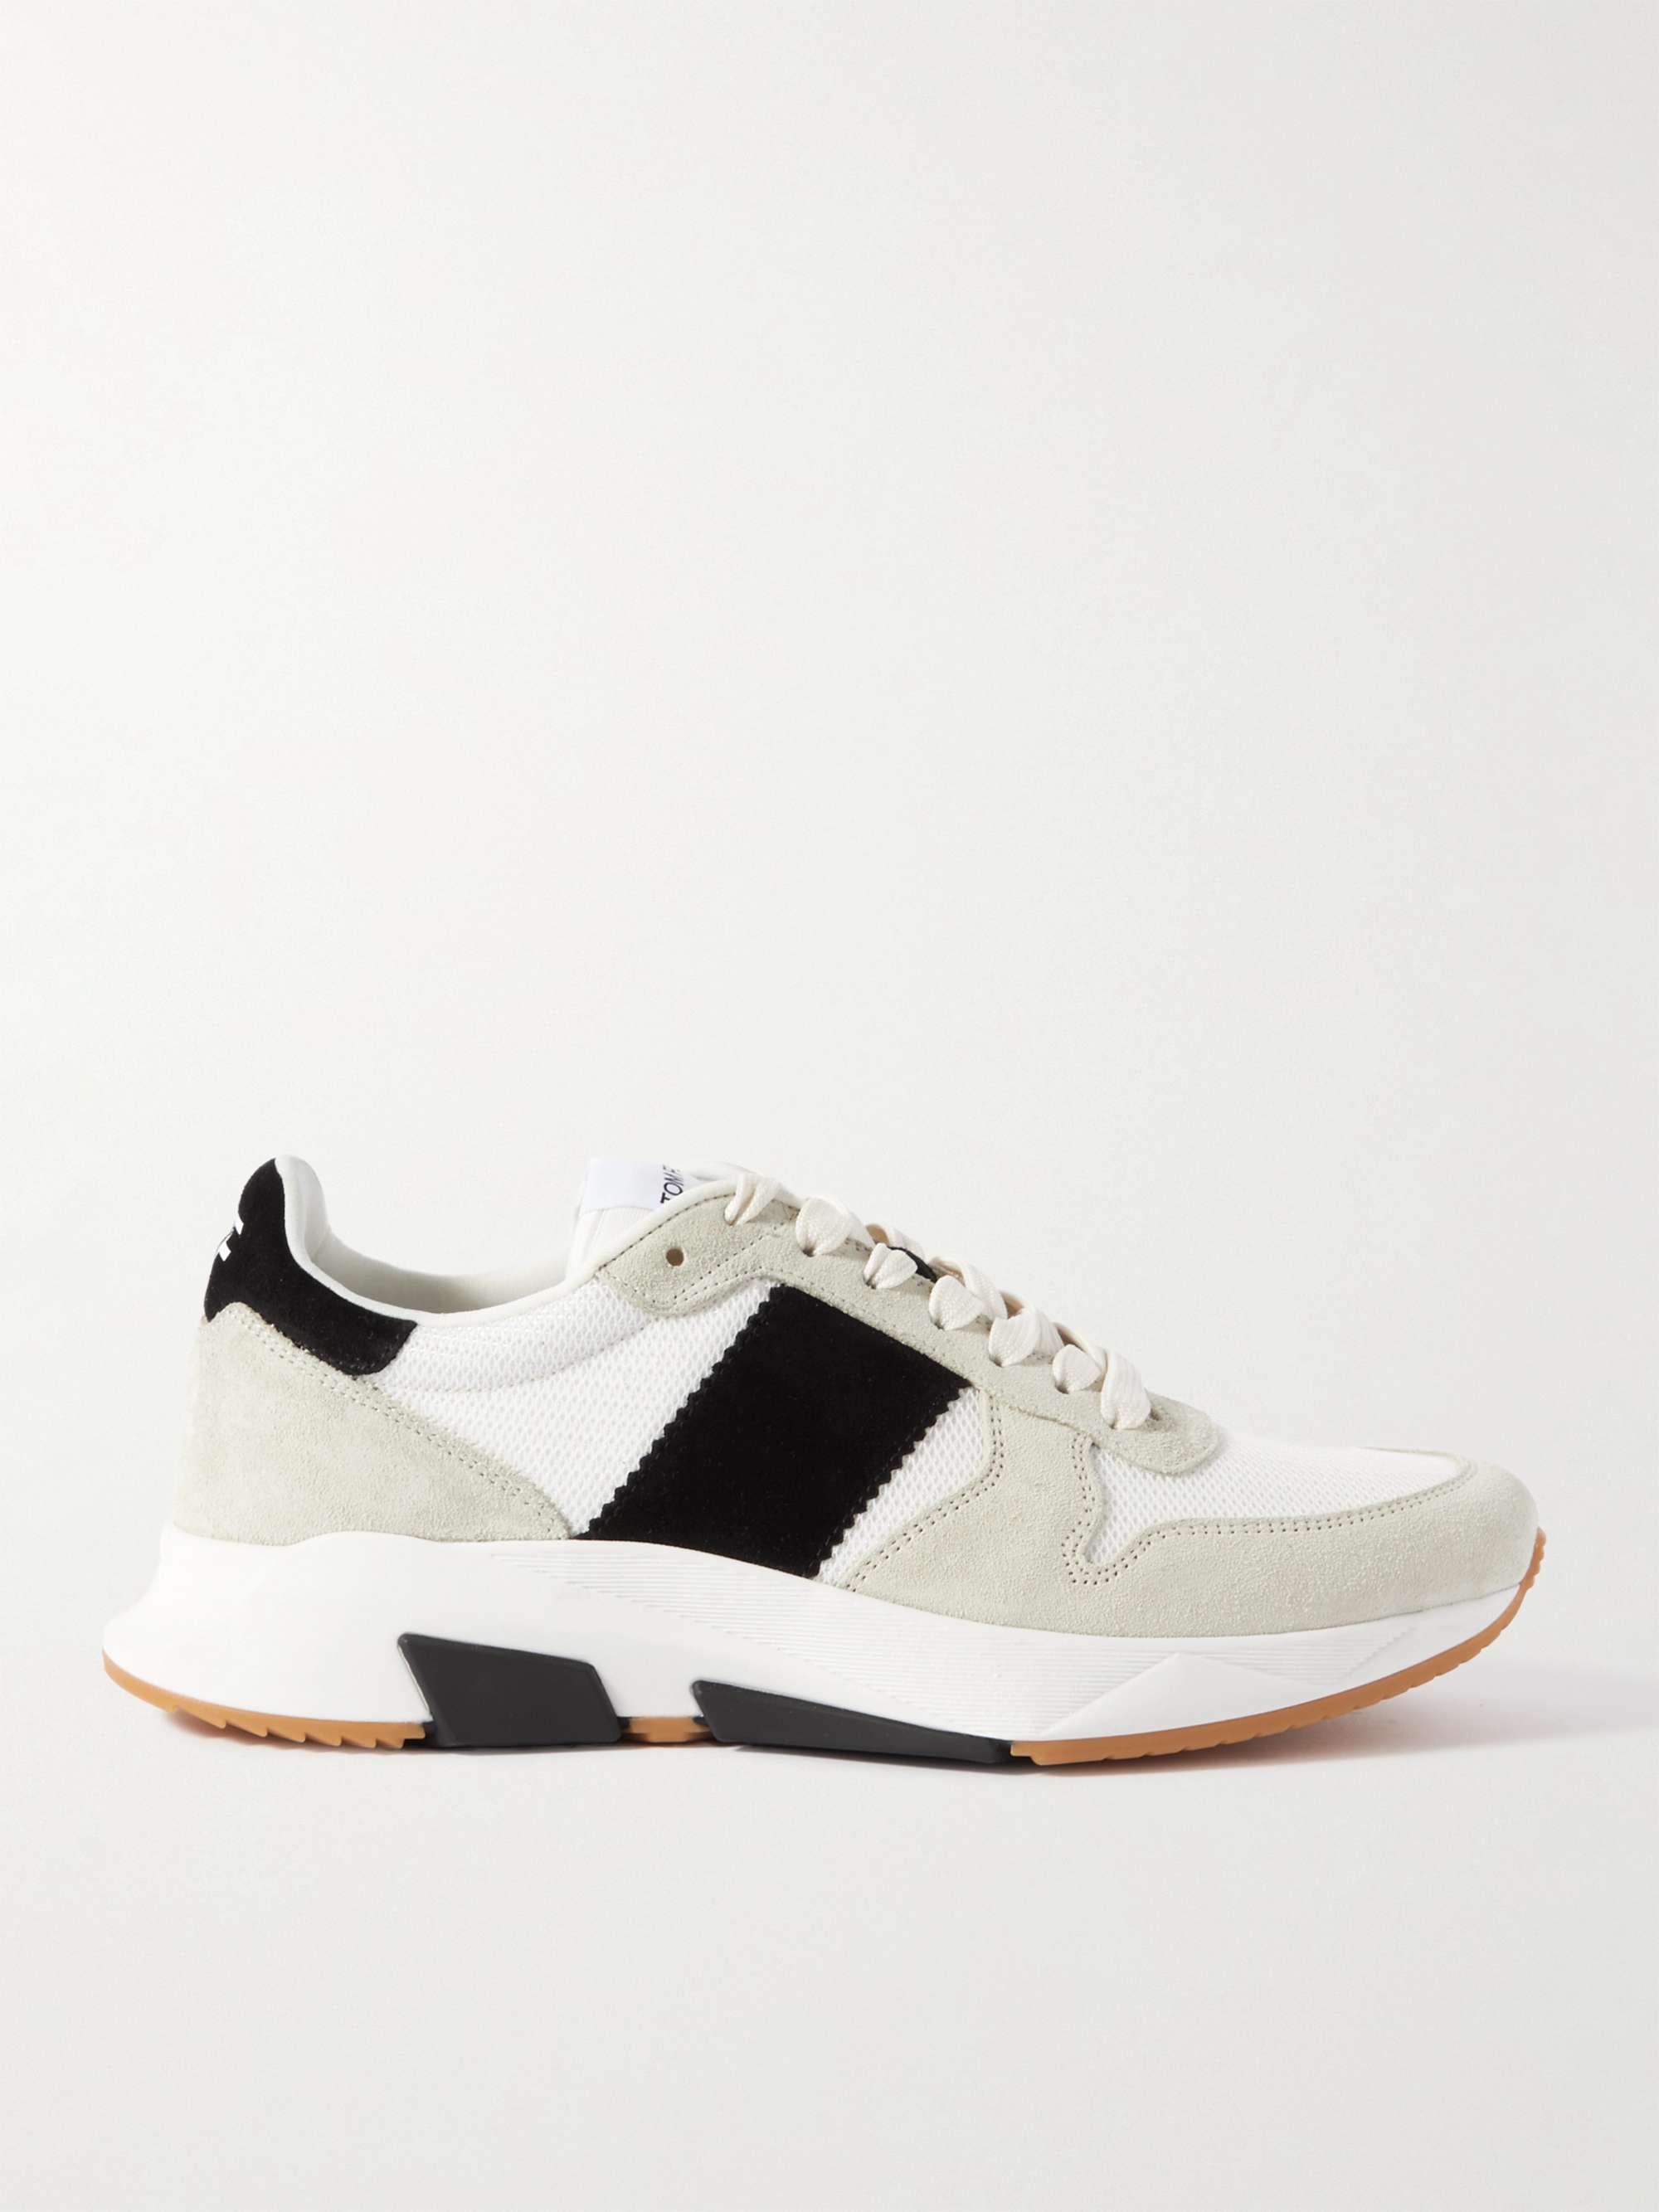 TOM FORD Suede and Mesh Sneakers for Men | PORTER